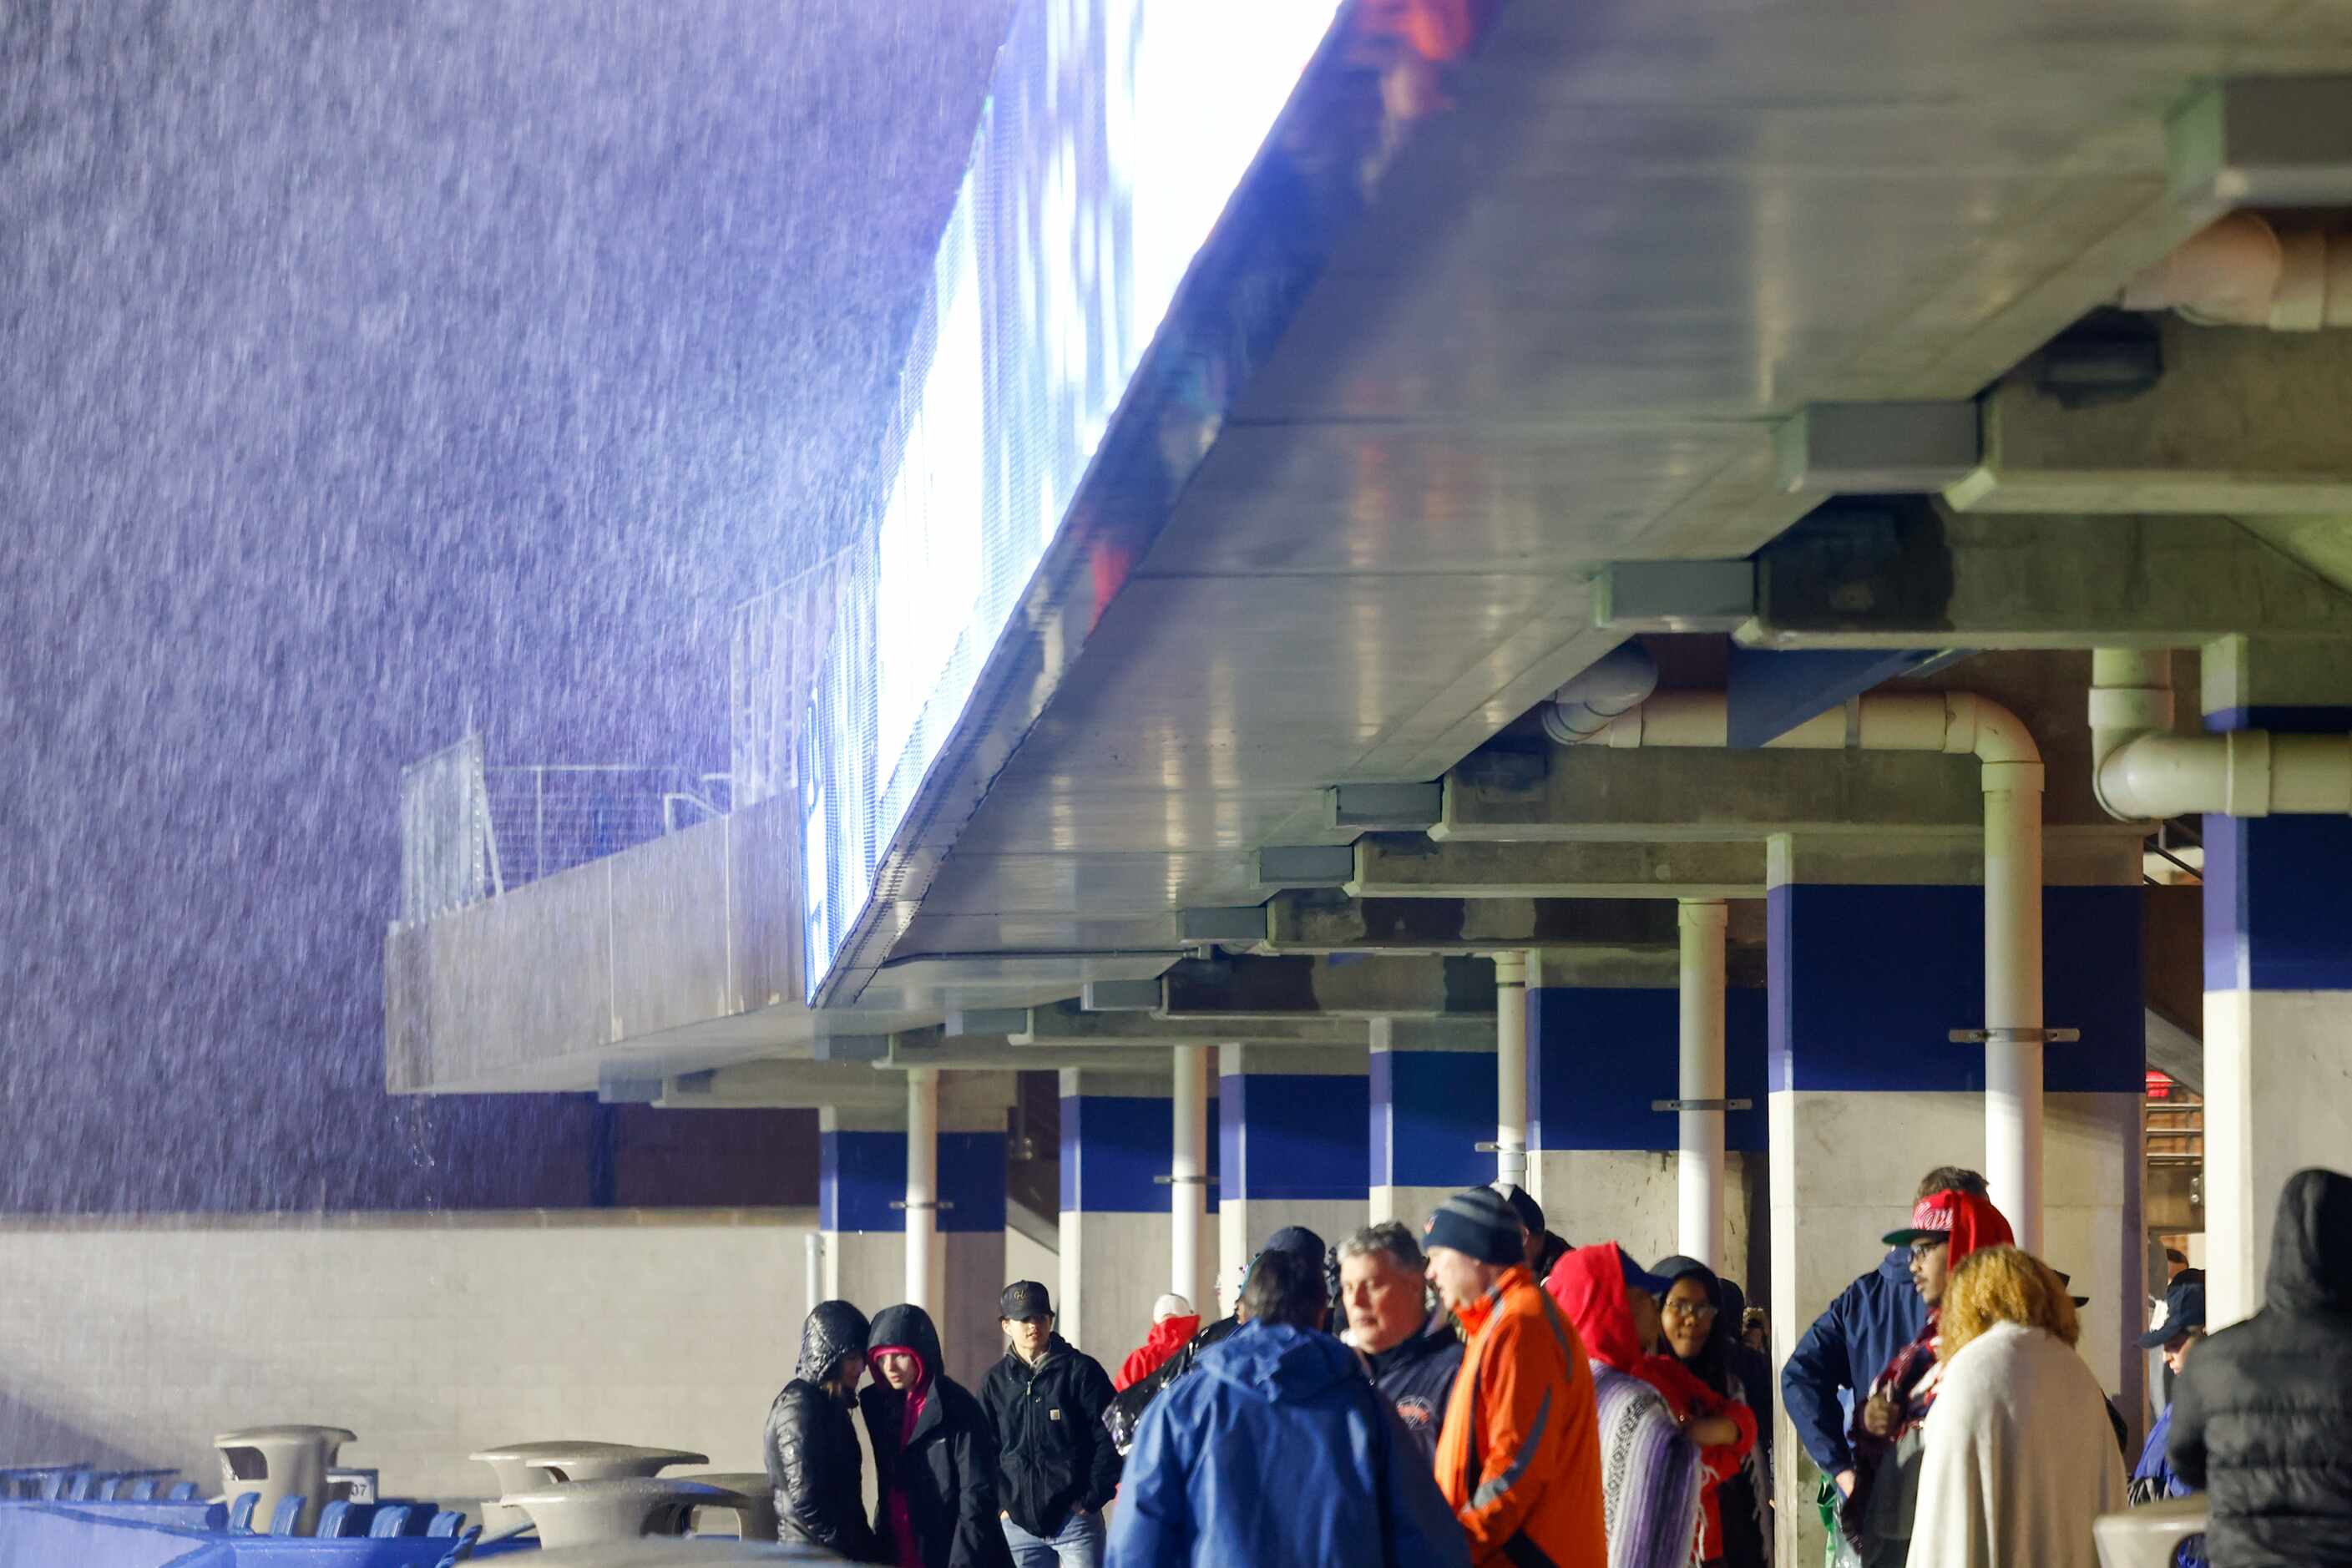 Bulldogs fans take shelter from the rain and lightning on the concourse level of the stadium...